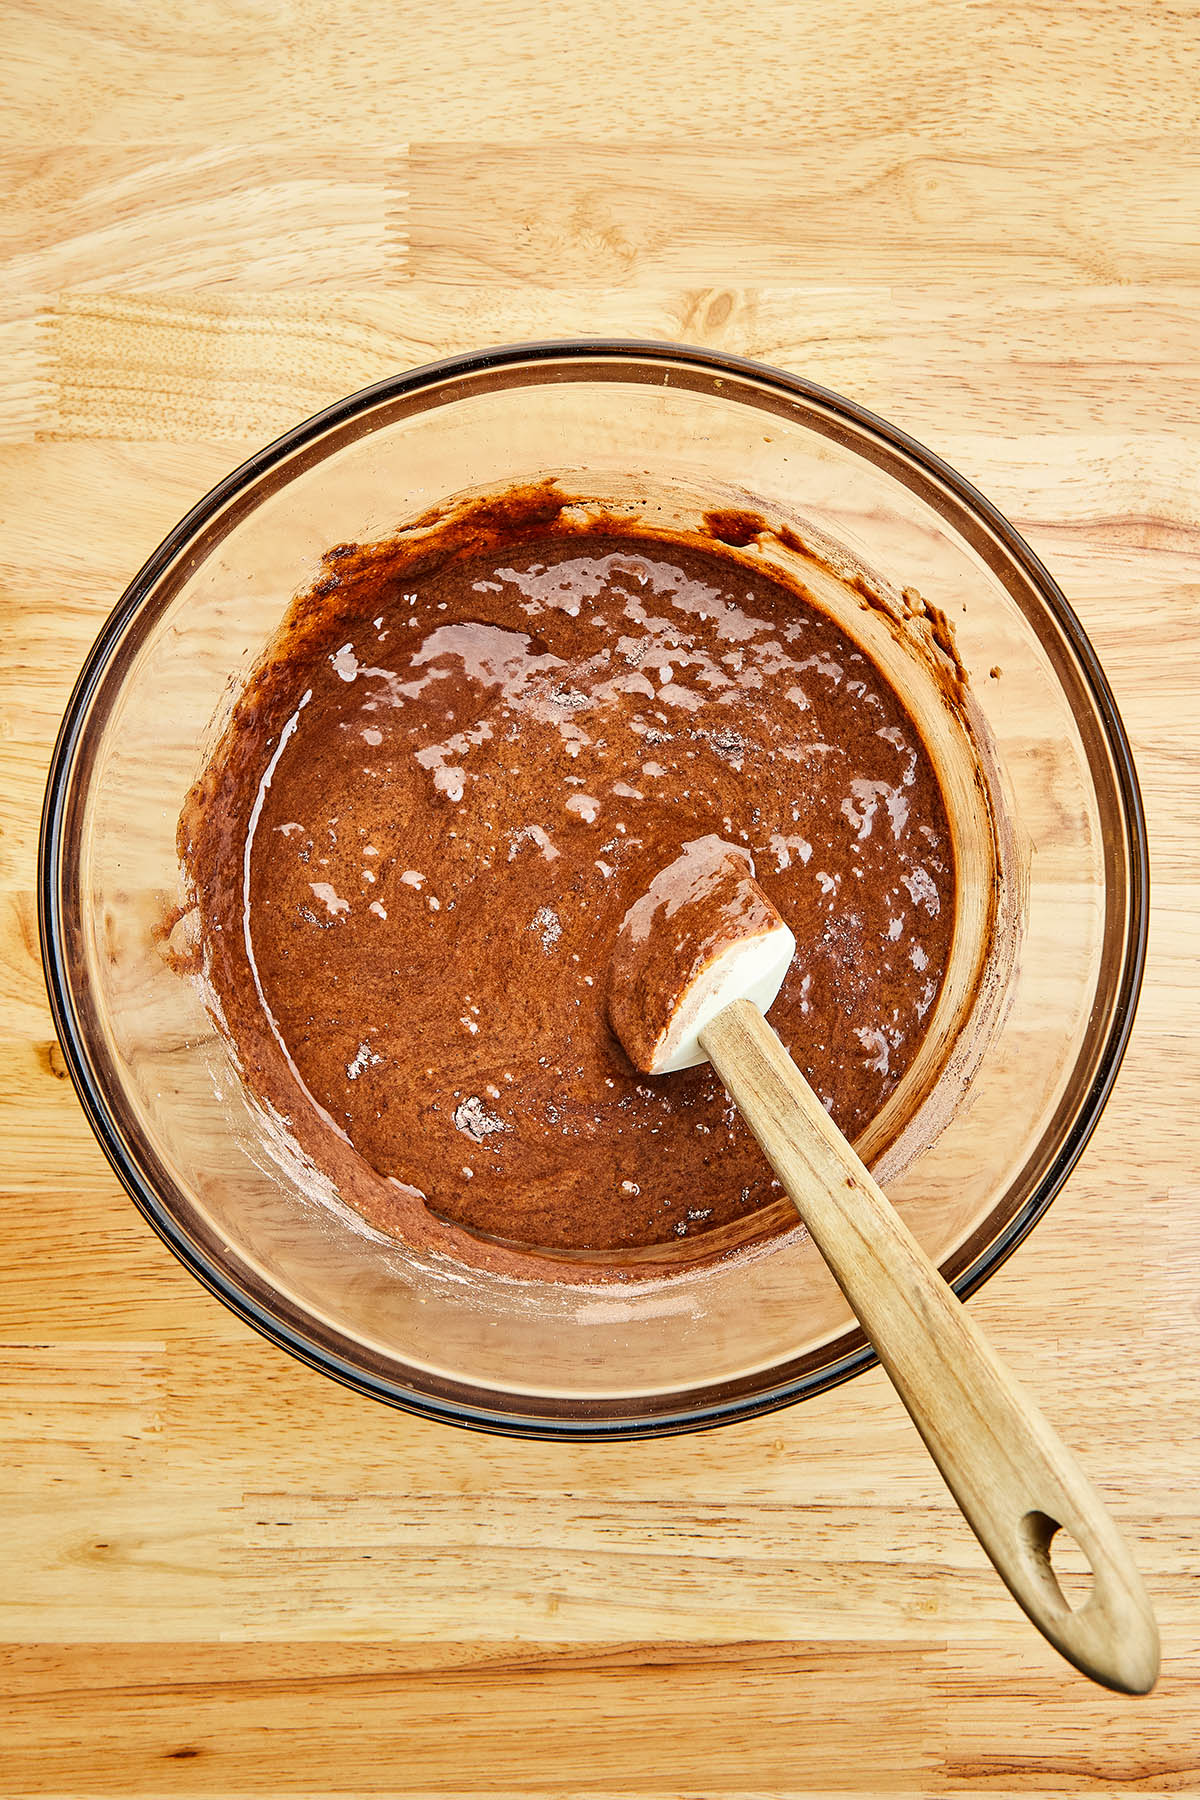 Mixed chocolate batter in a glass mixing bowl.